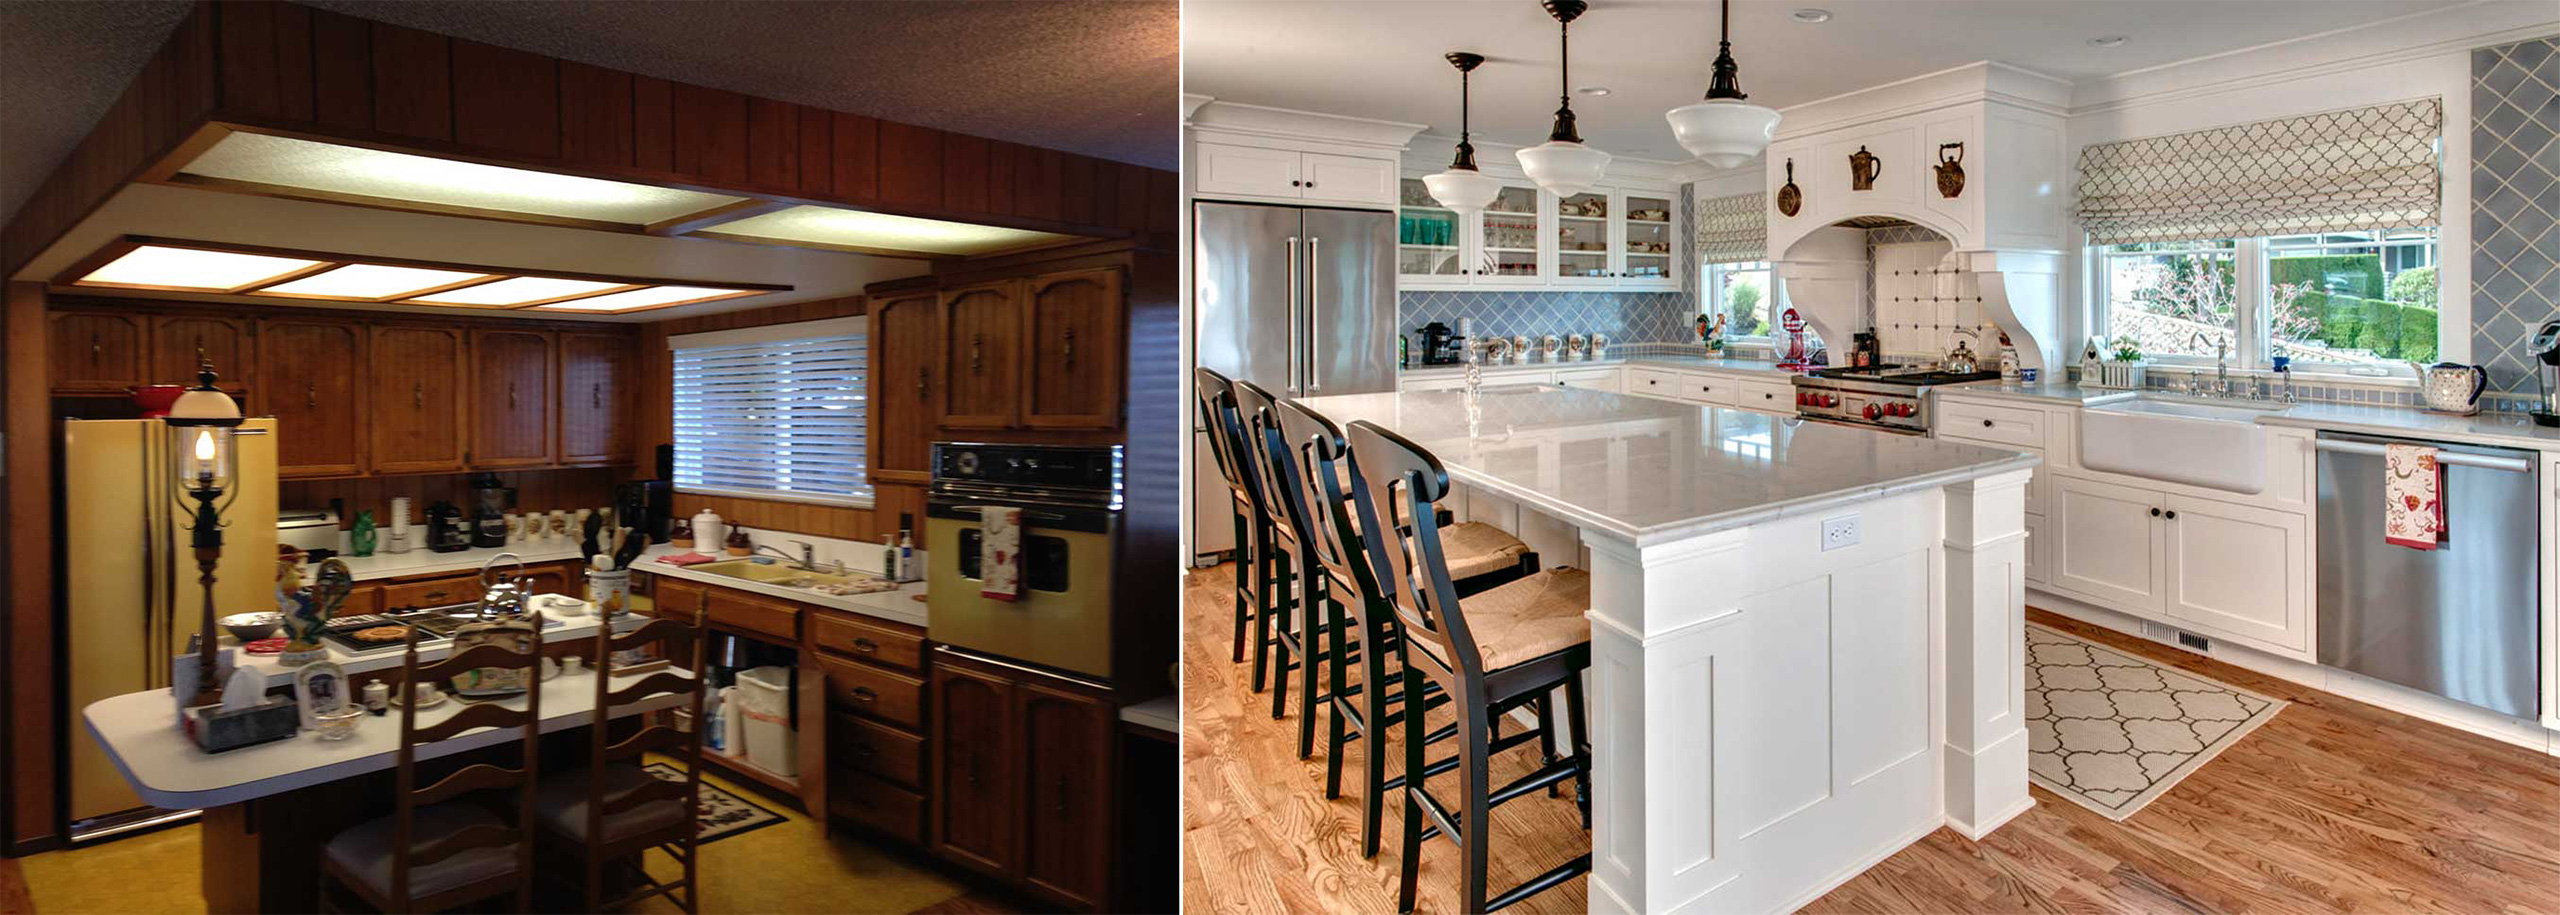 Remodel of a 1960s Home – Sound Landing: Before & After: Kitchen – Board & Vellum